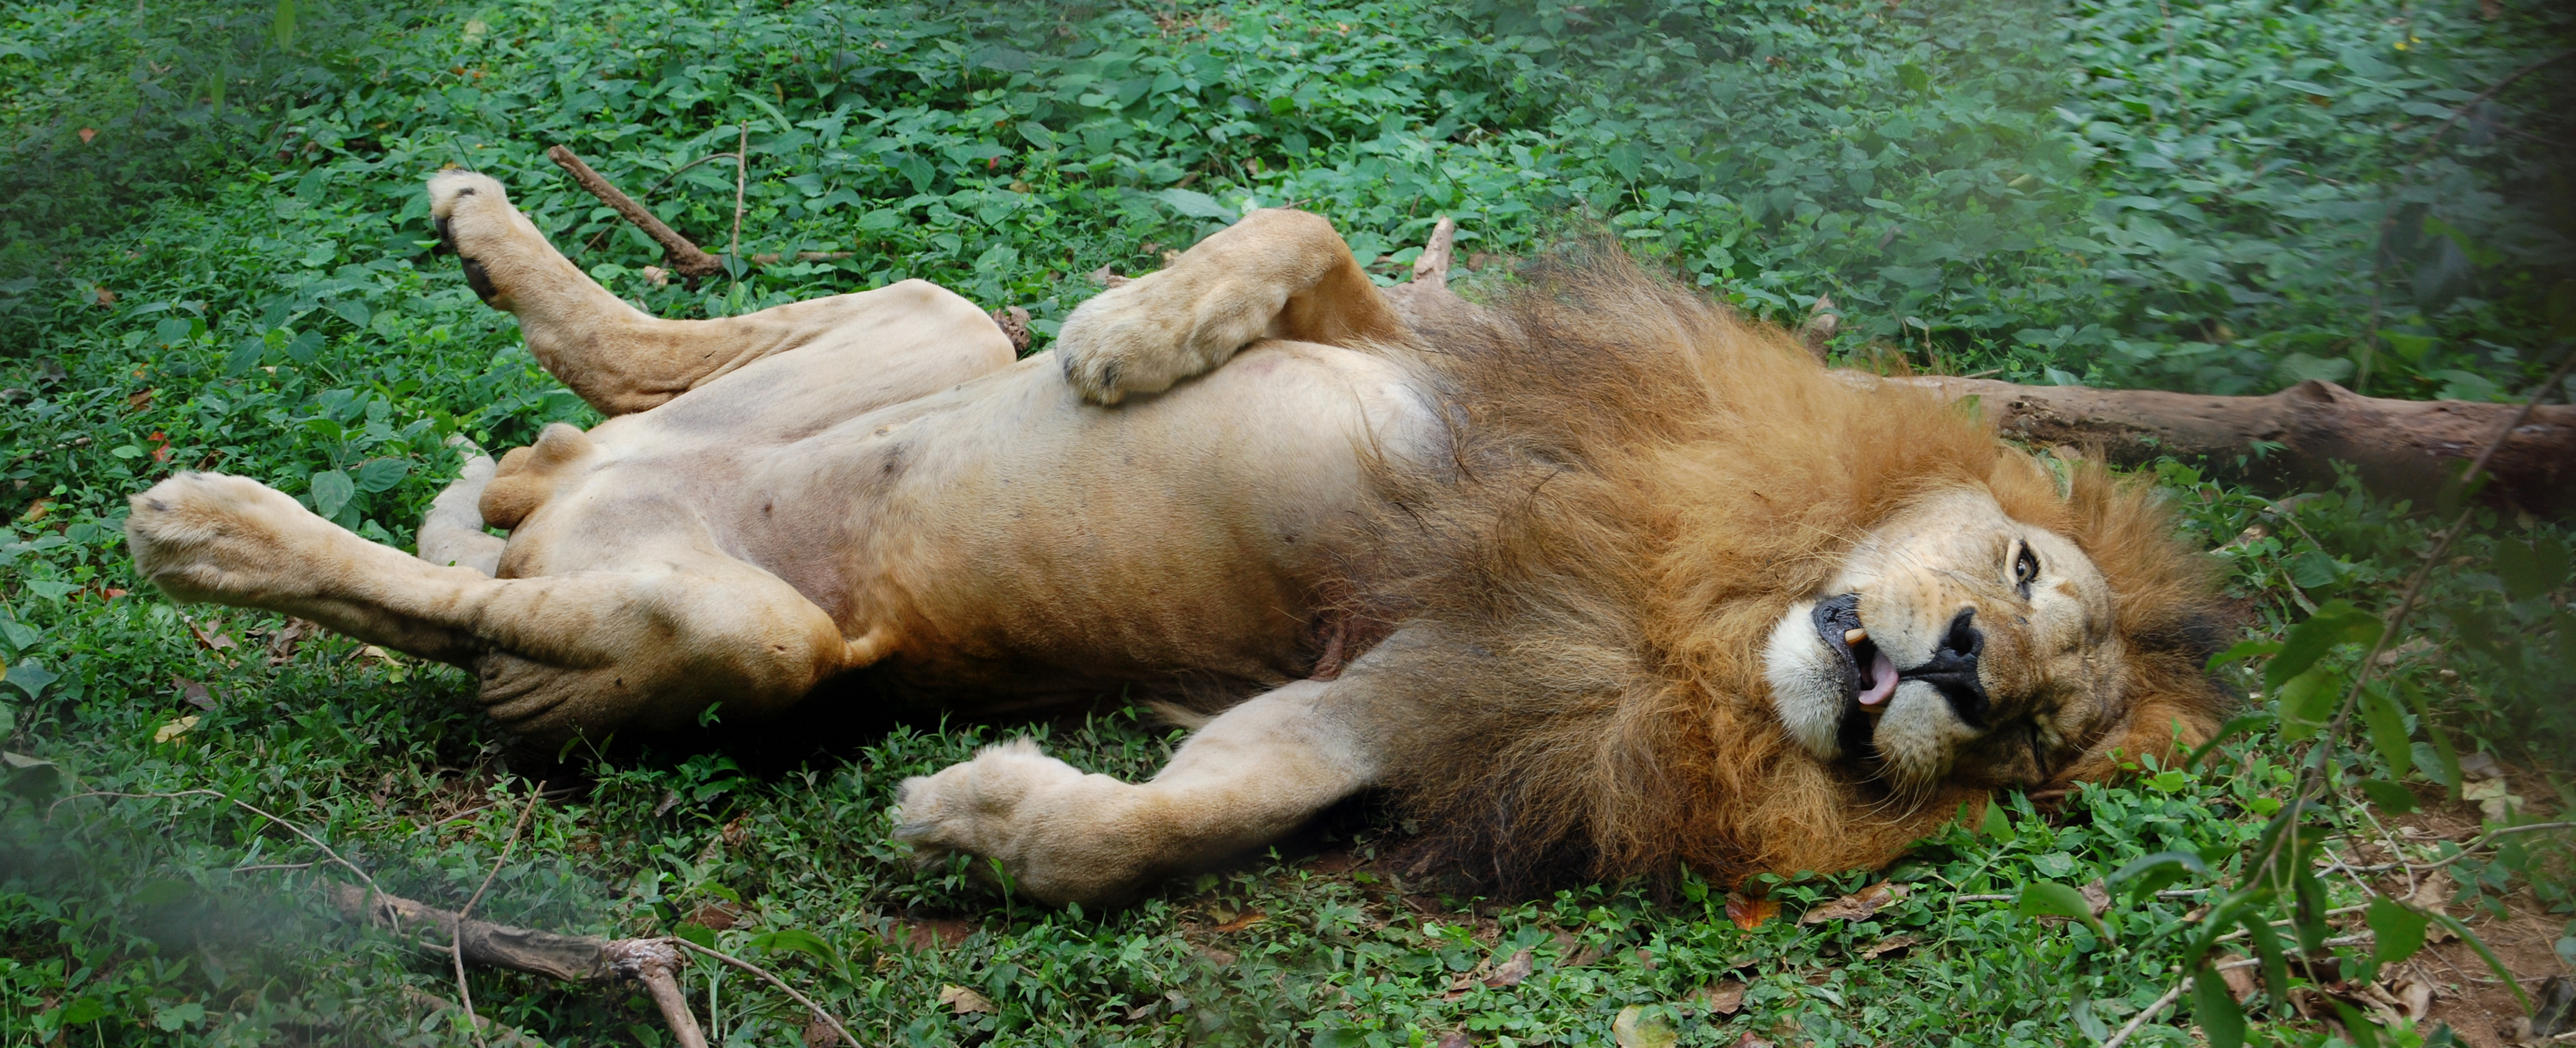 File:African Lion Resting at the Entebbe Zoo in Uganda.jpg ...